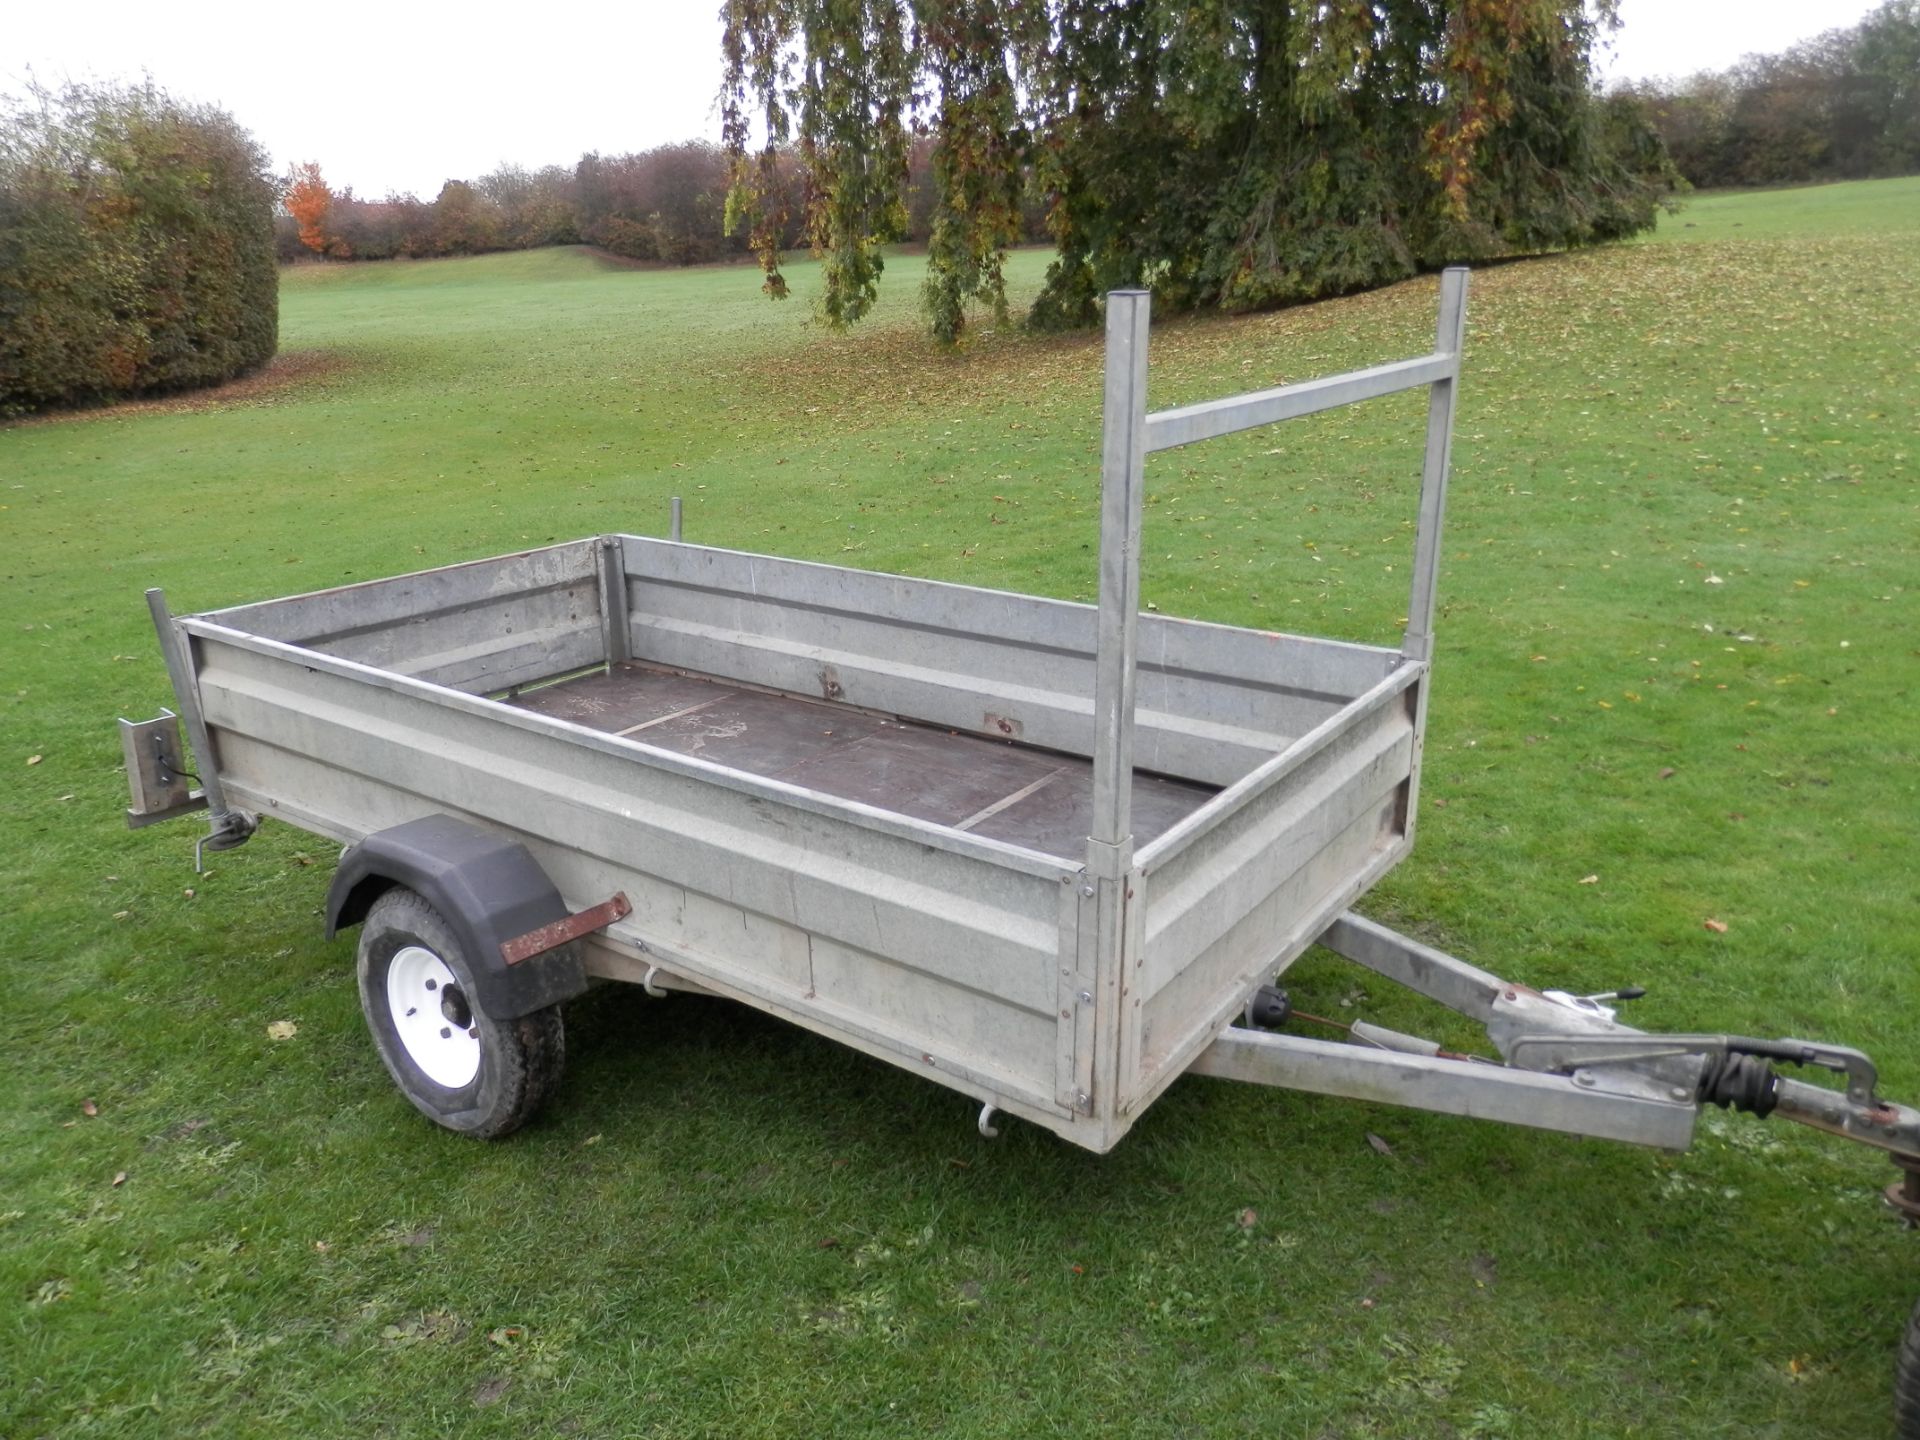 GOOD SOLID 8 X 4' GALVANIZED TRAILER, 1.5 TONNE. DROP REAR FOR EASY LOADING.